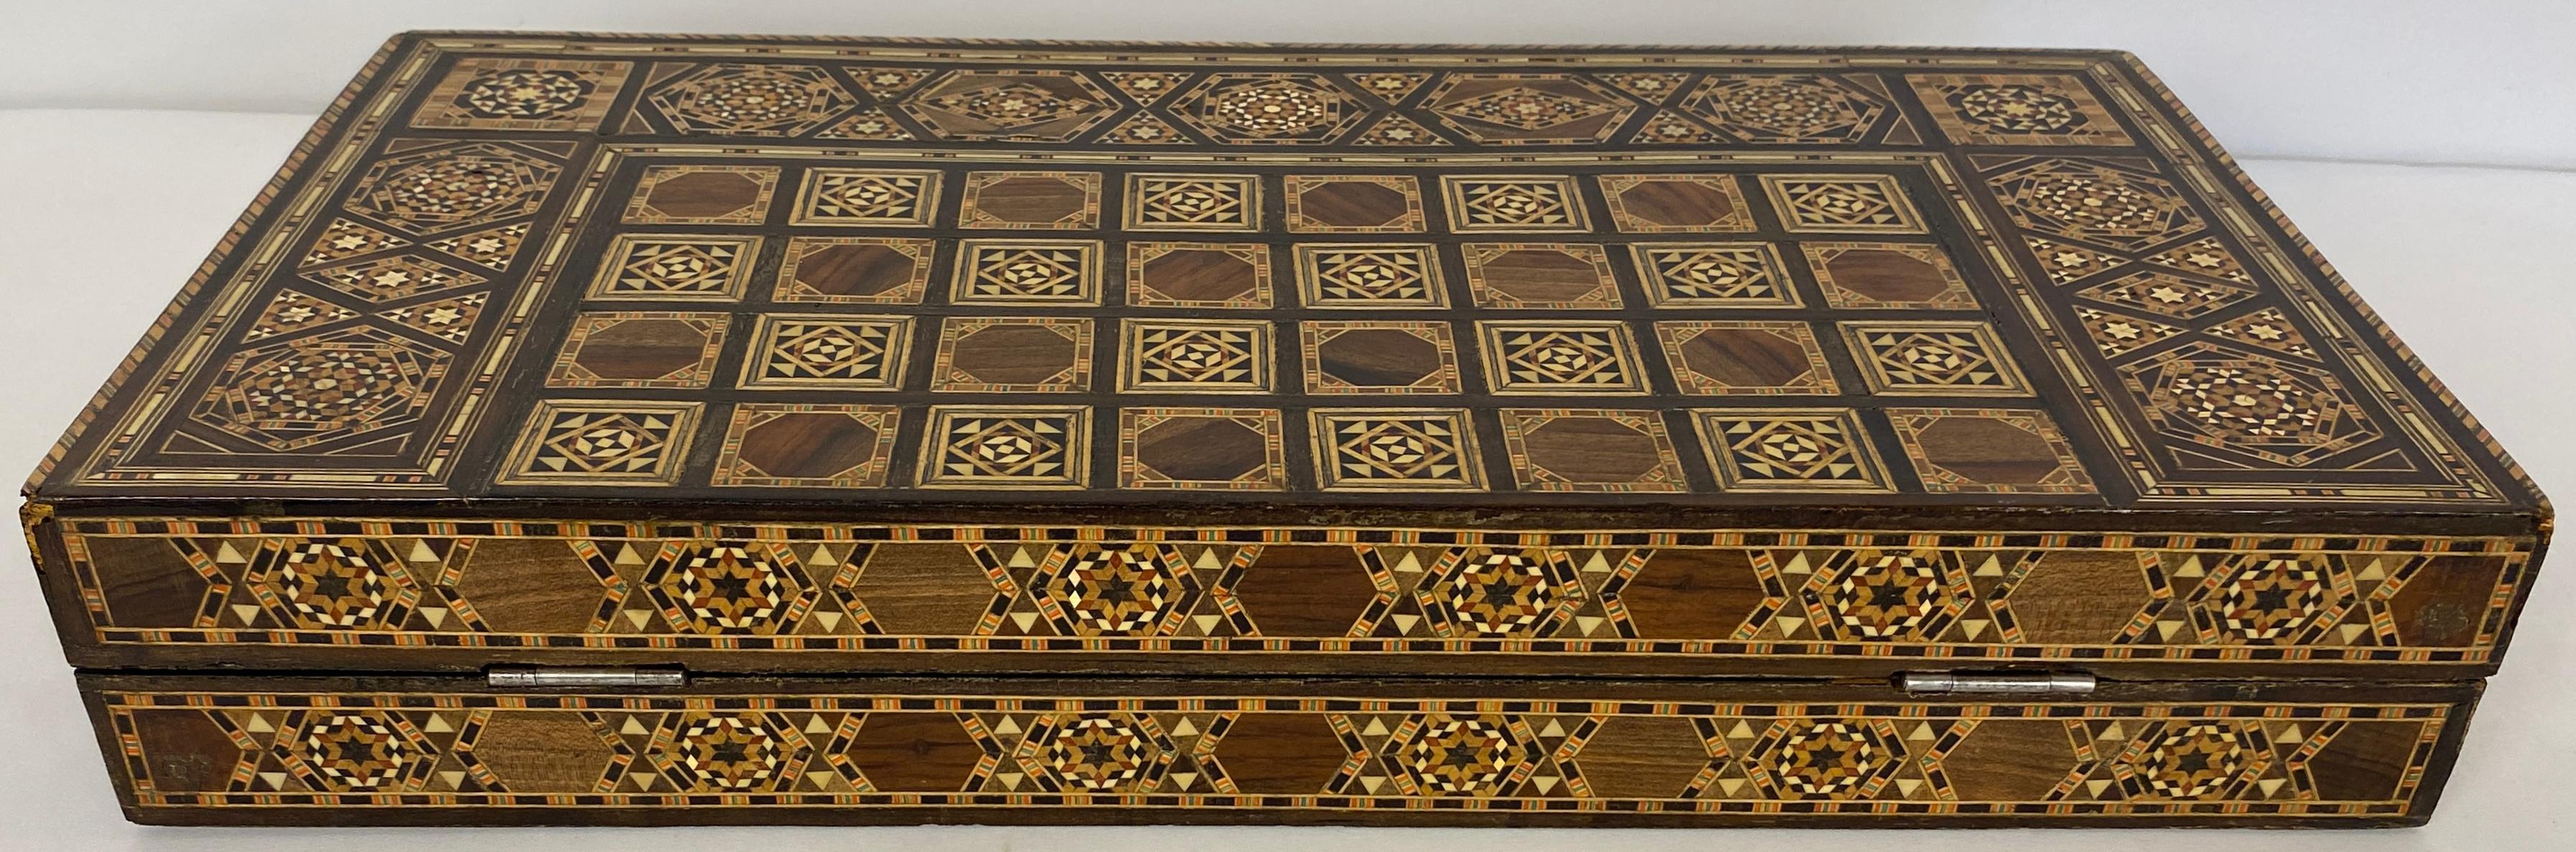 Leather Syrian Mosaic Wooden Inlaid Marquetry Box Backgammon Set